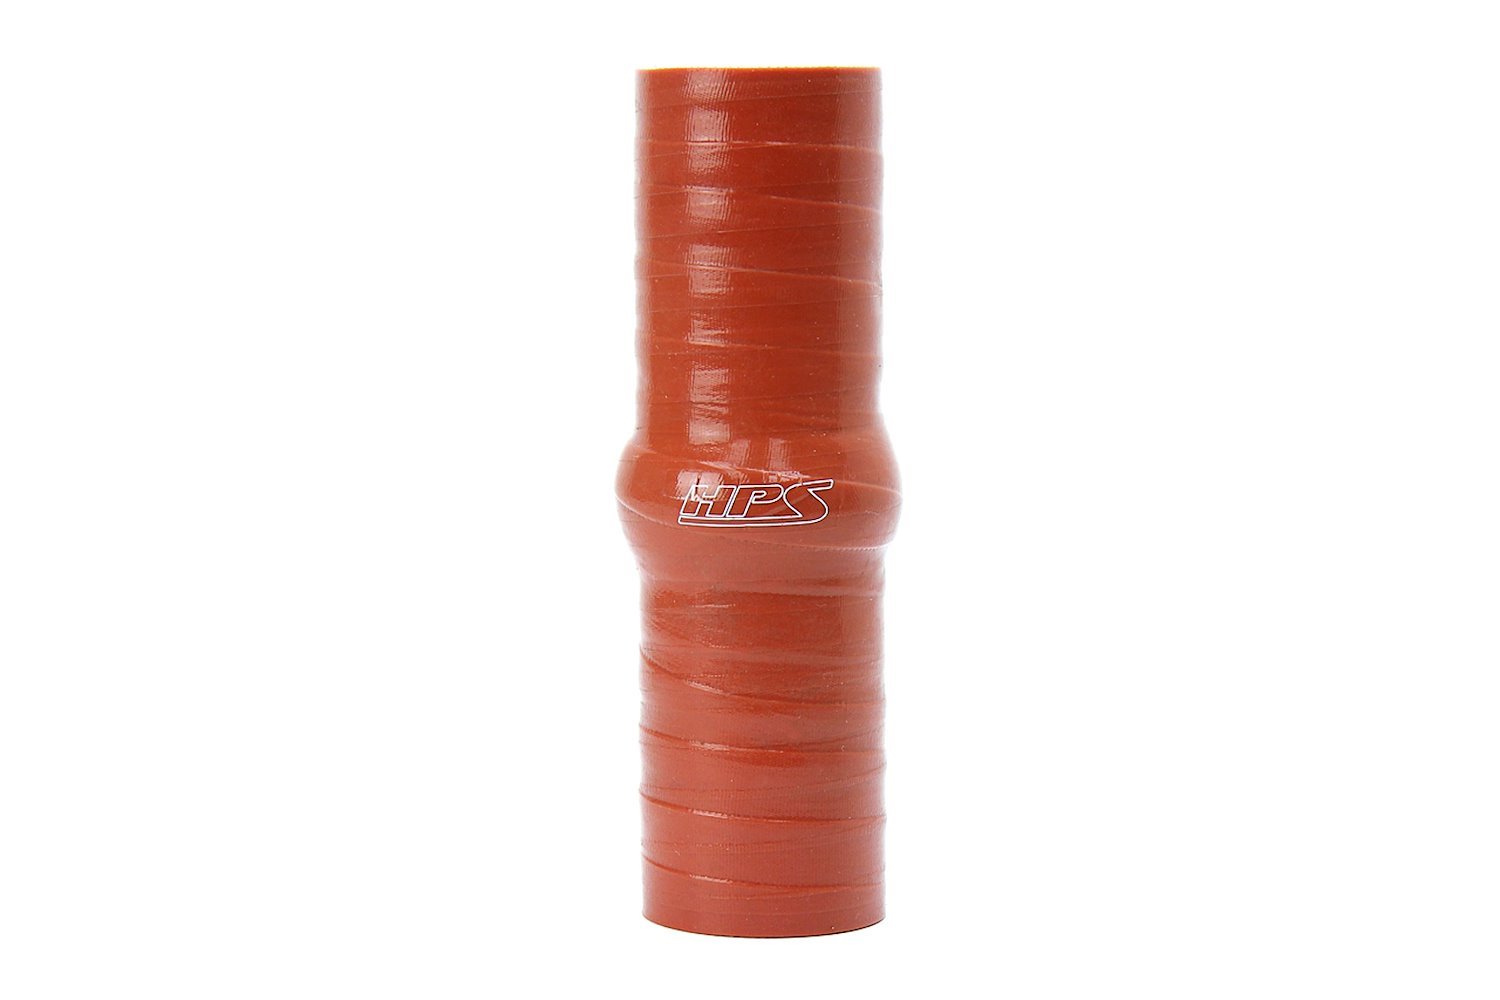 SHC-087-L6-HOT Silicone Hump Coupler Hose, High-Temp 4-Ply Aramid Reinforced, 7/8 in. ID, 6 in. Long